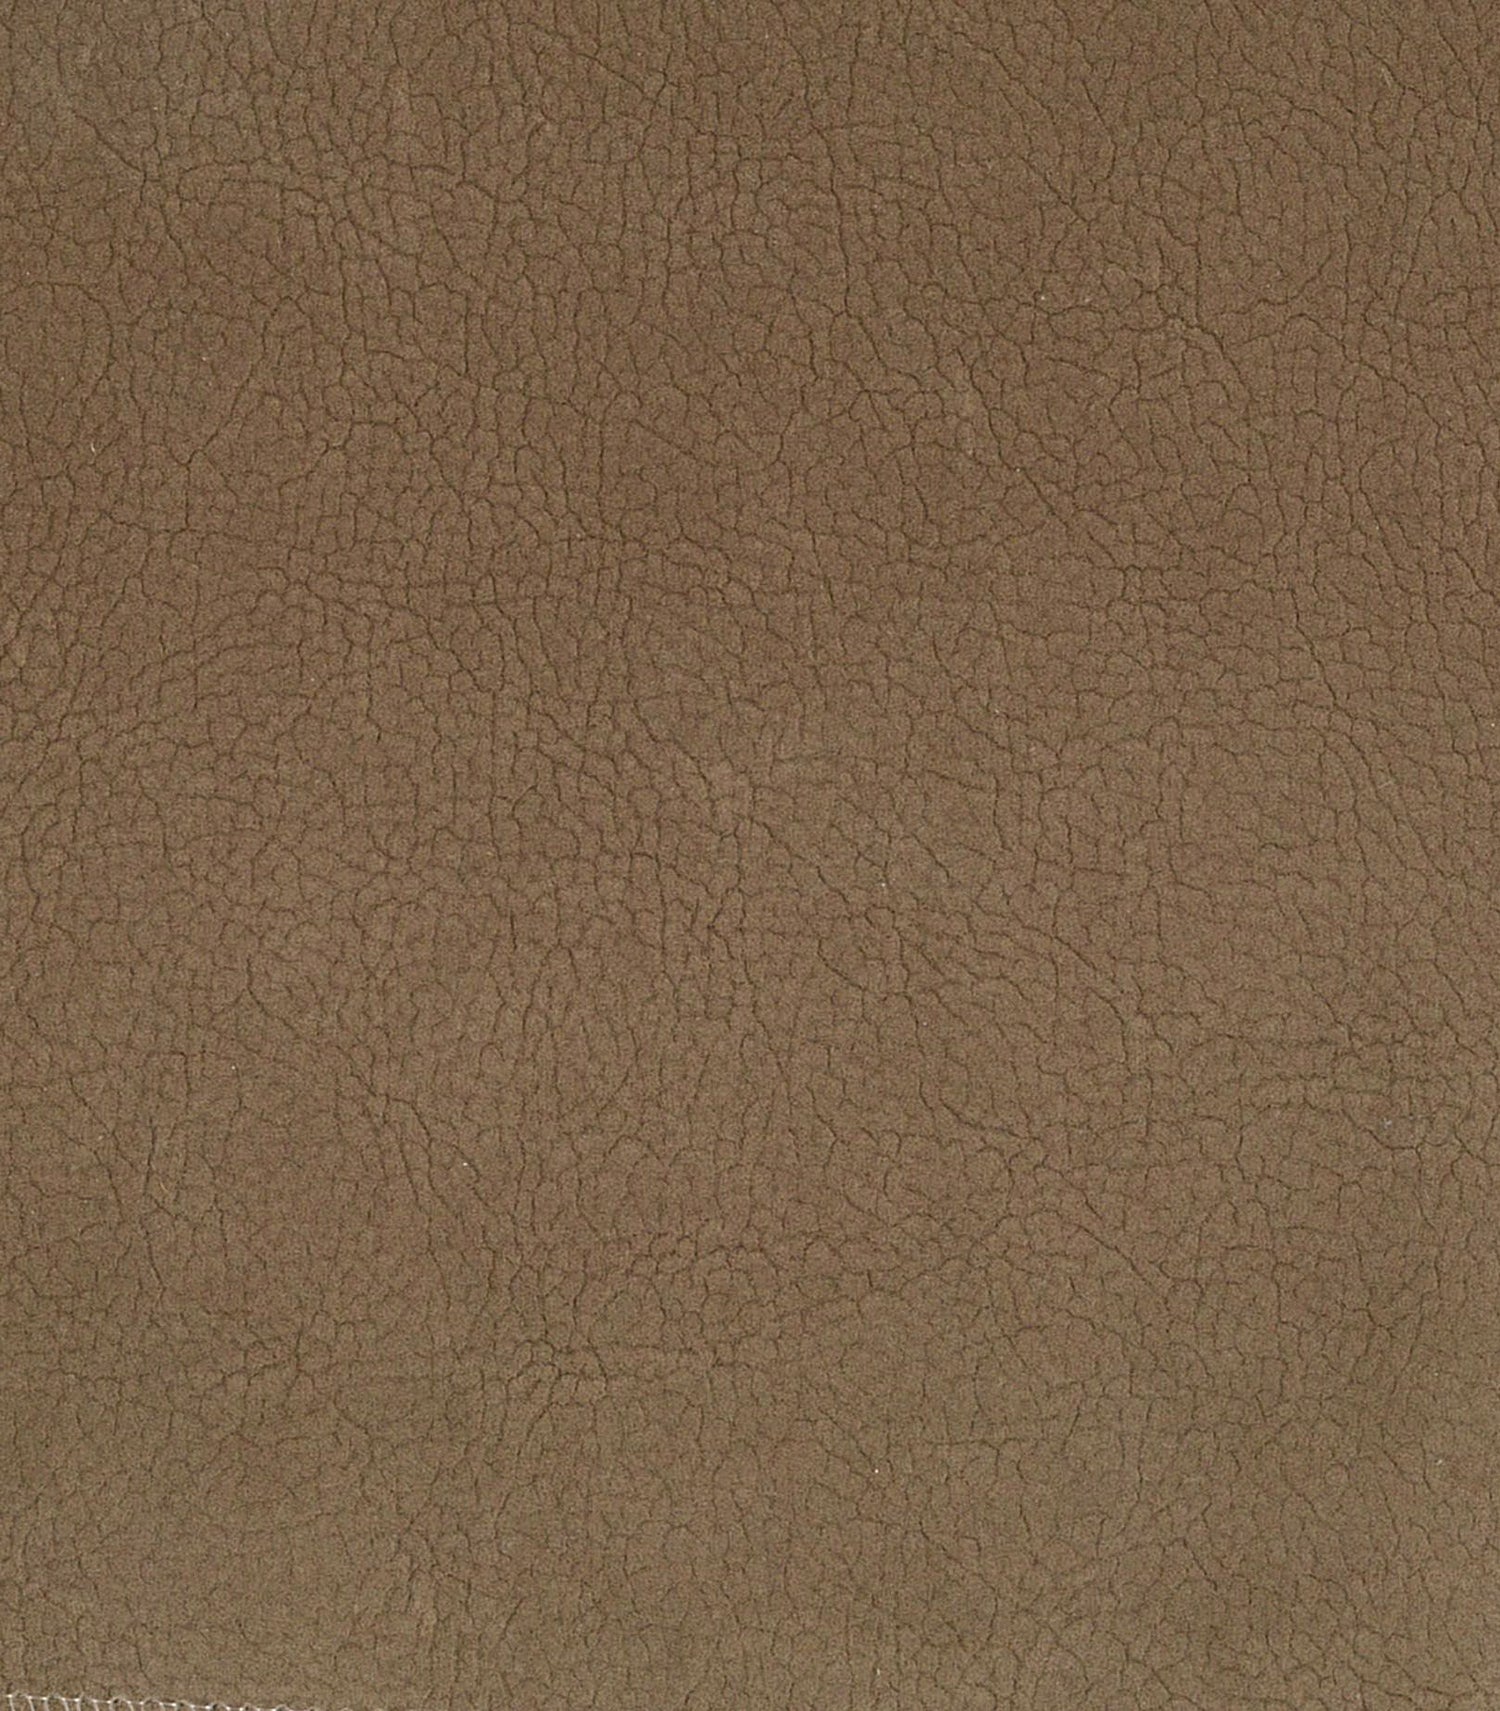 Georgia Suede fabric in twig color - pattern number H6 37505937 - by Scalamandre in the Old World Weavers collection